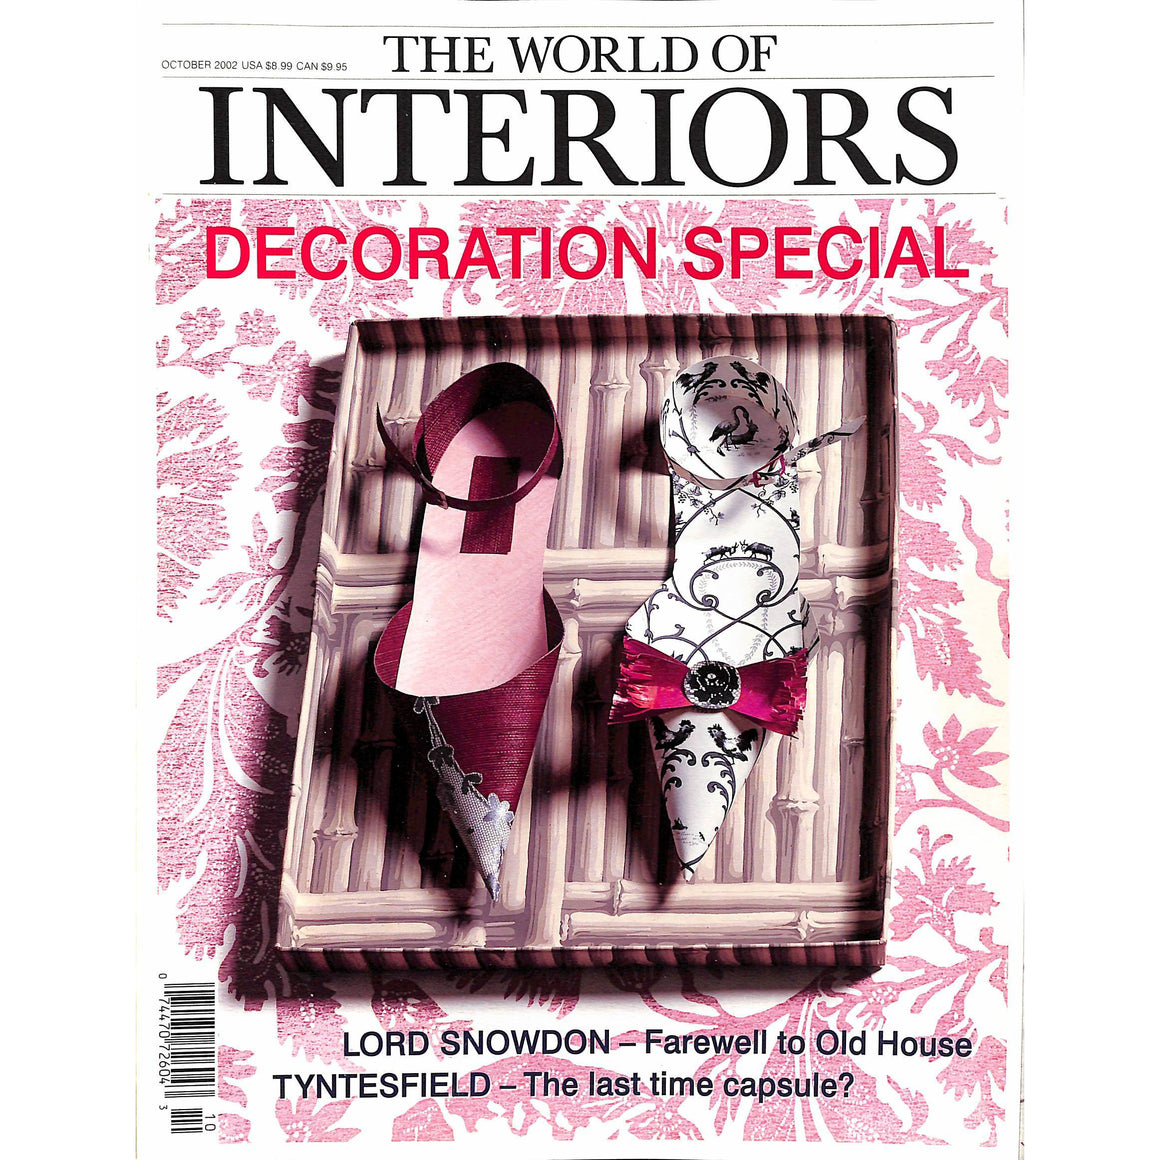 "The World Of Interiors: Decoration Special" October 2002